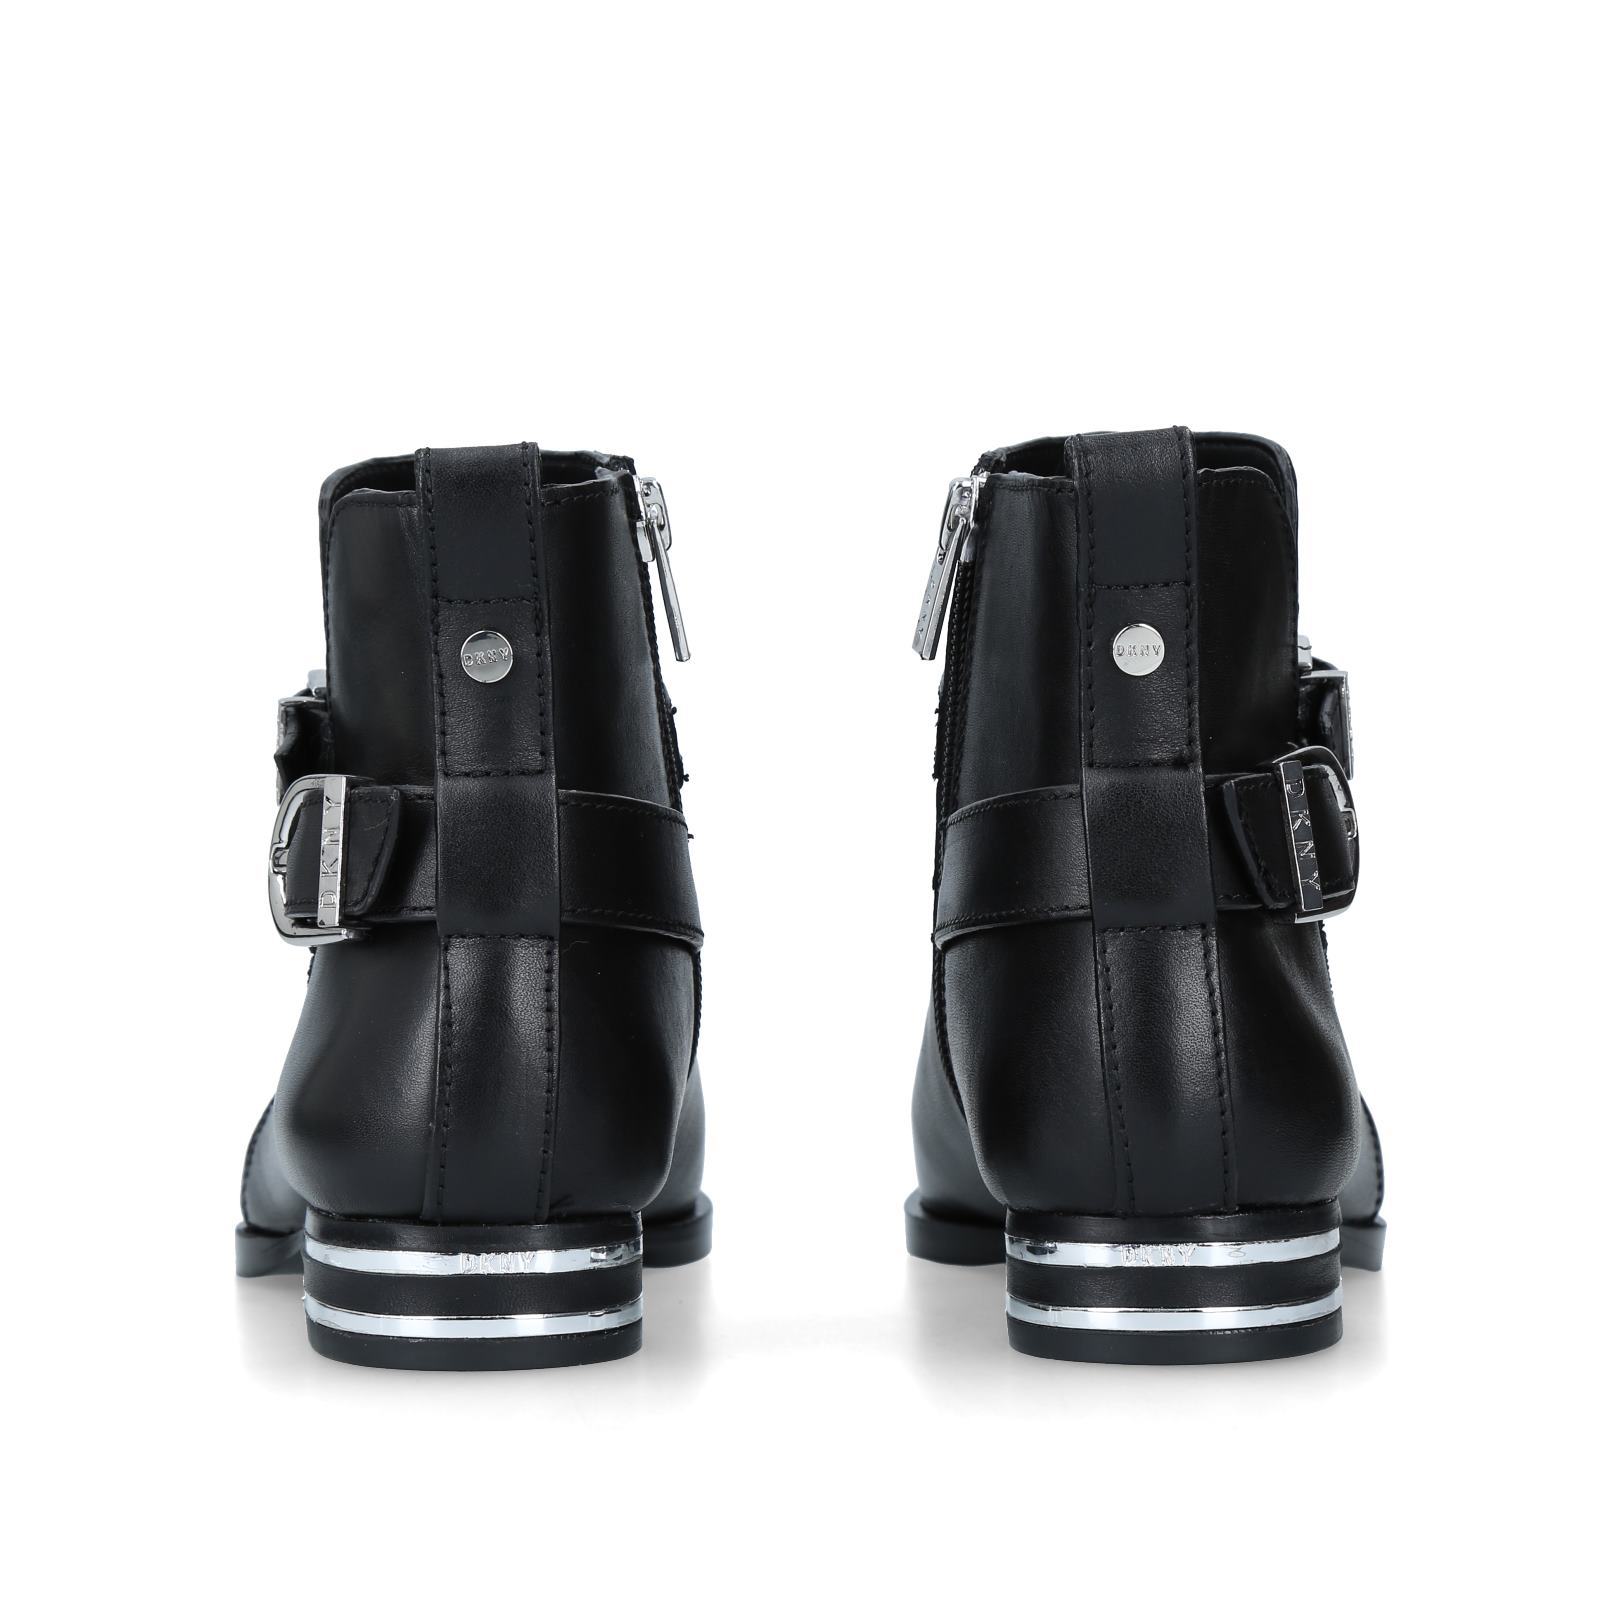 dkny lily boot